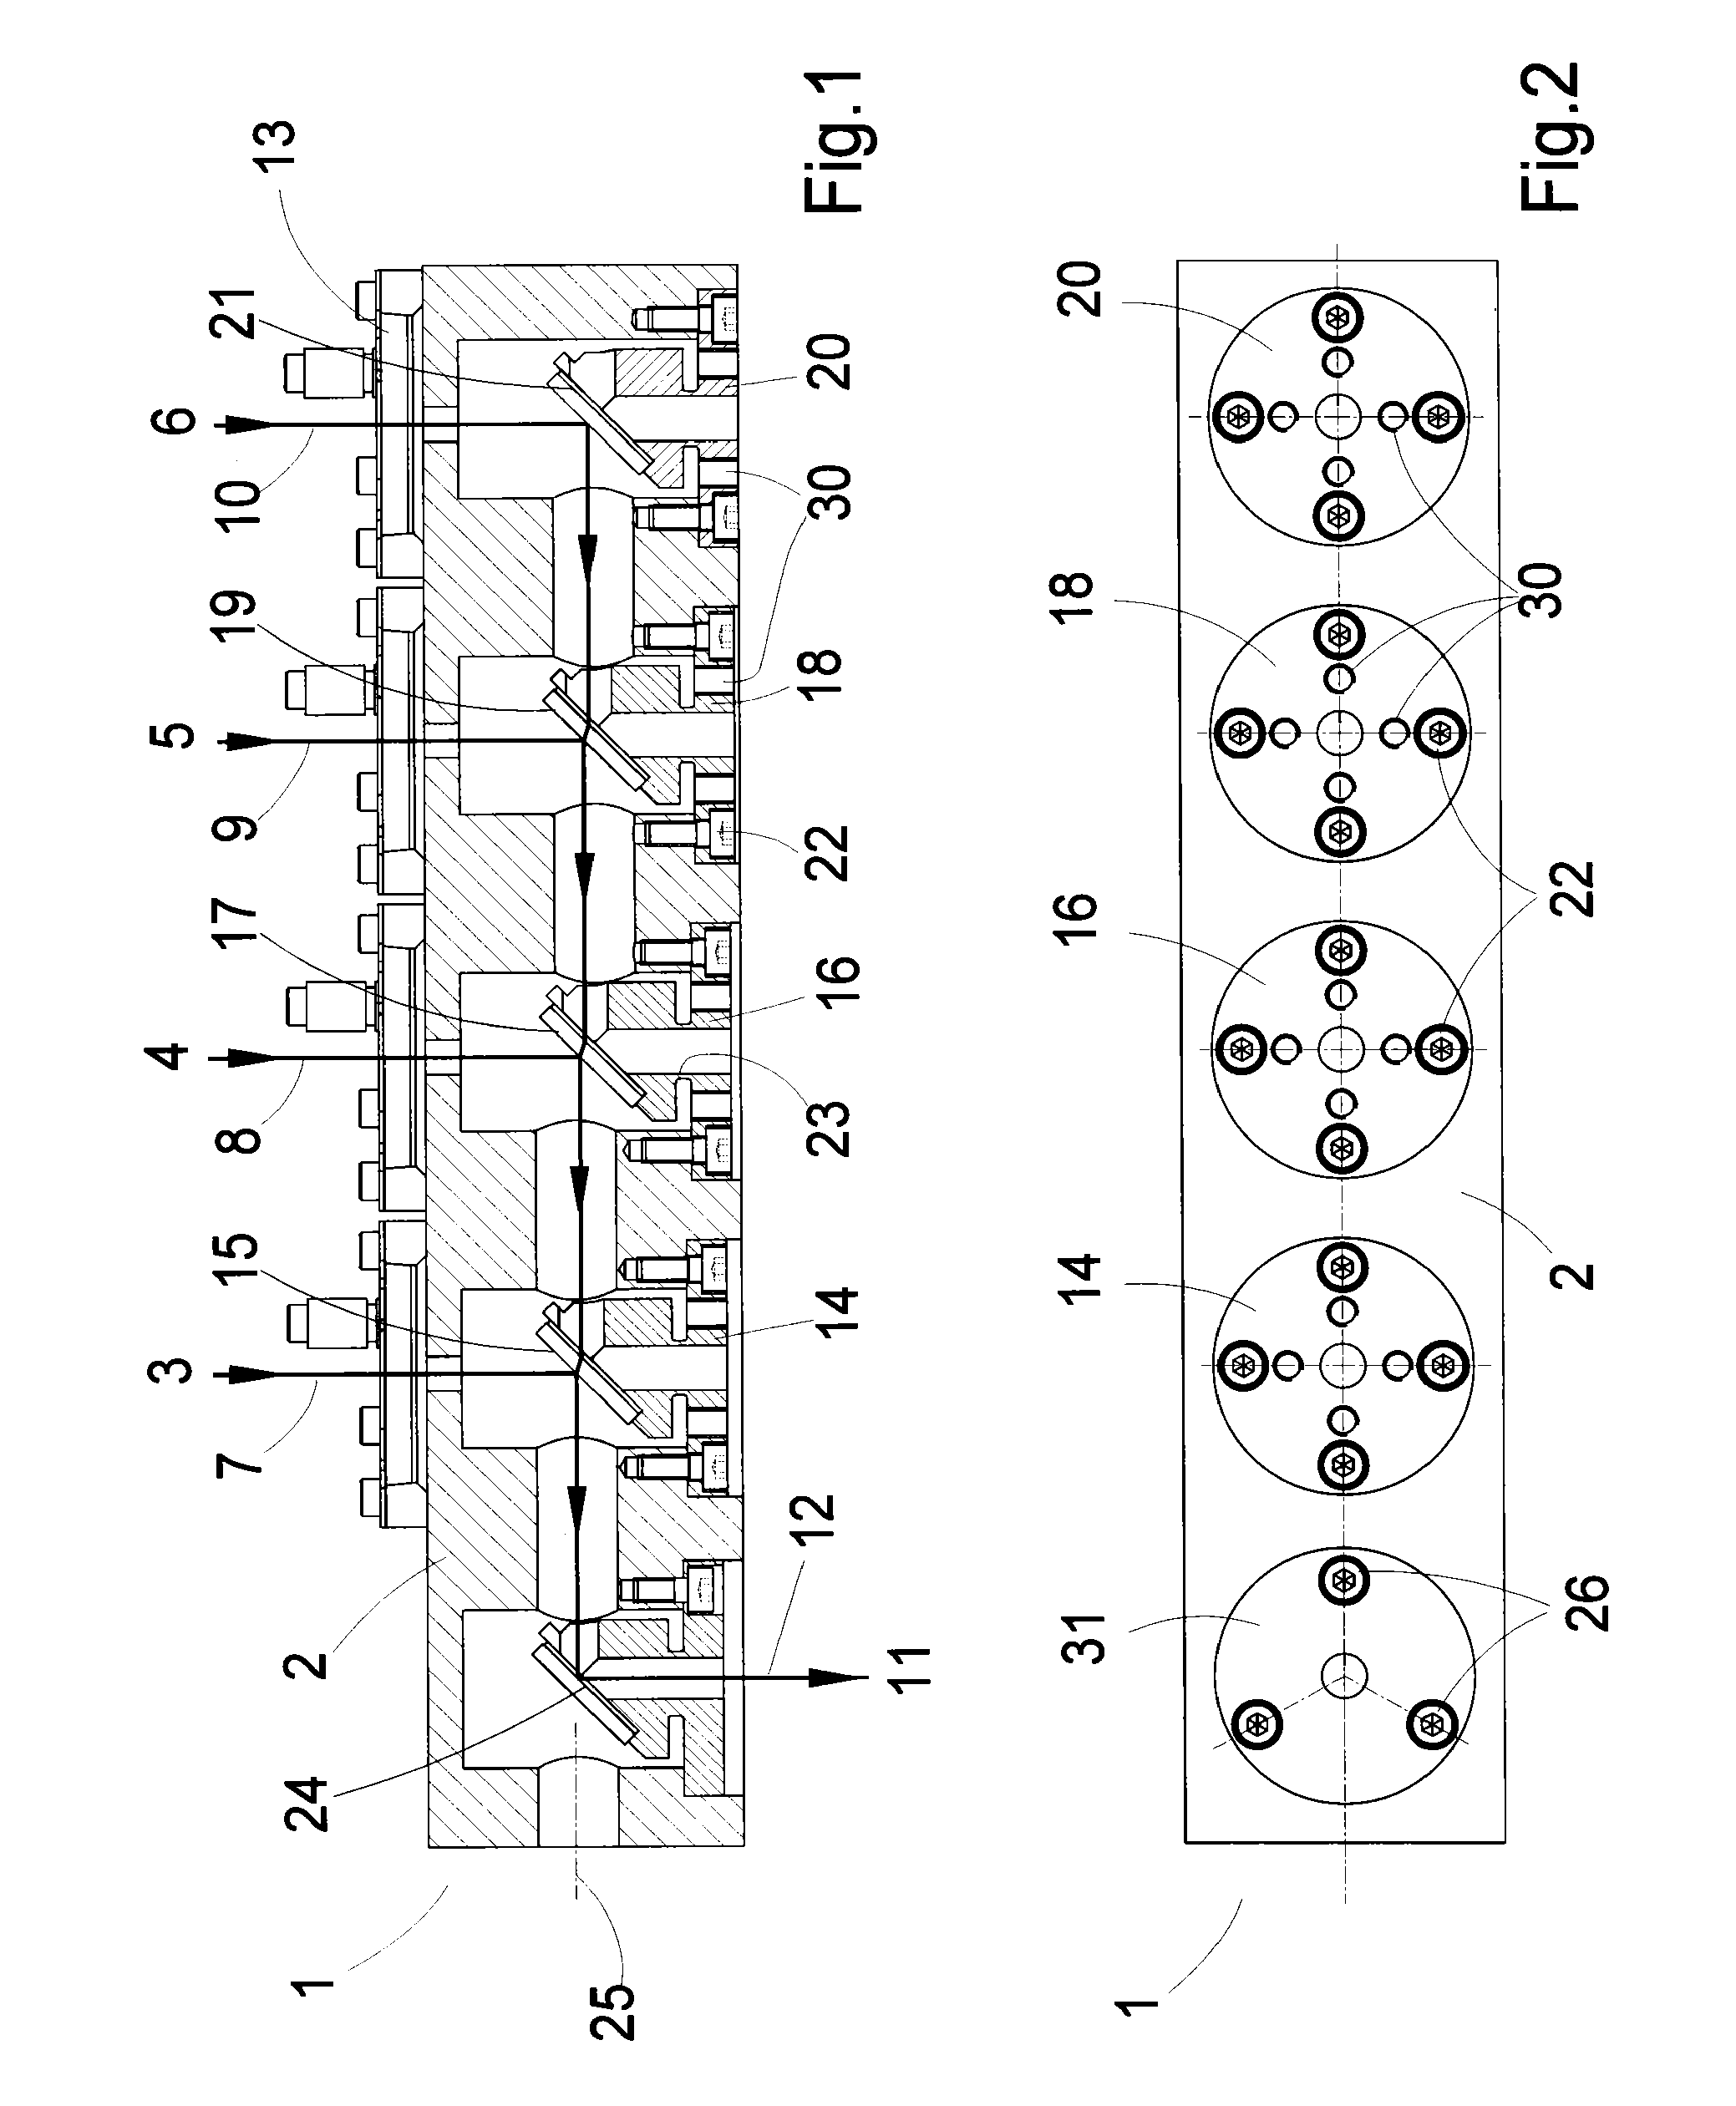 Apparatus for combining individual light beams of different wavelengths to form a coaxial light bundle